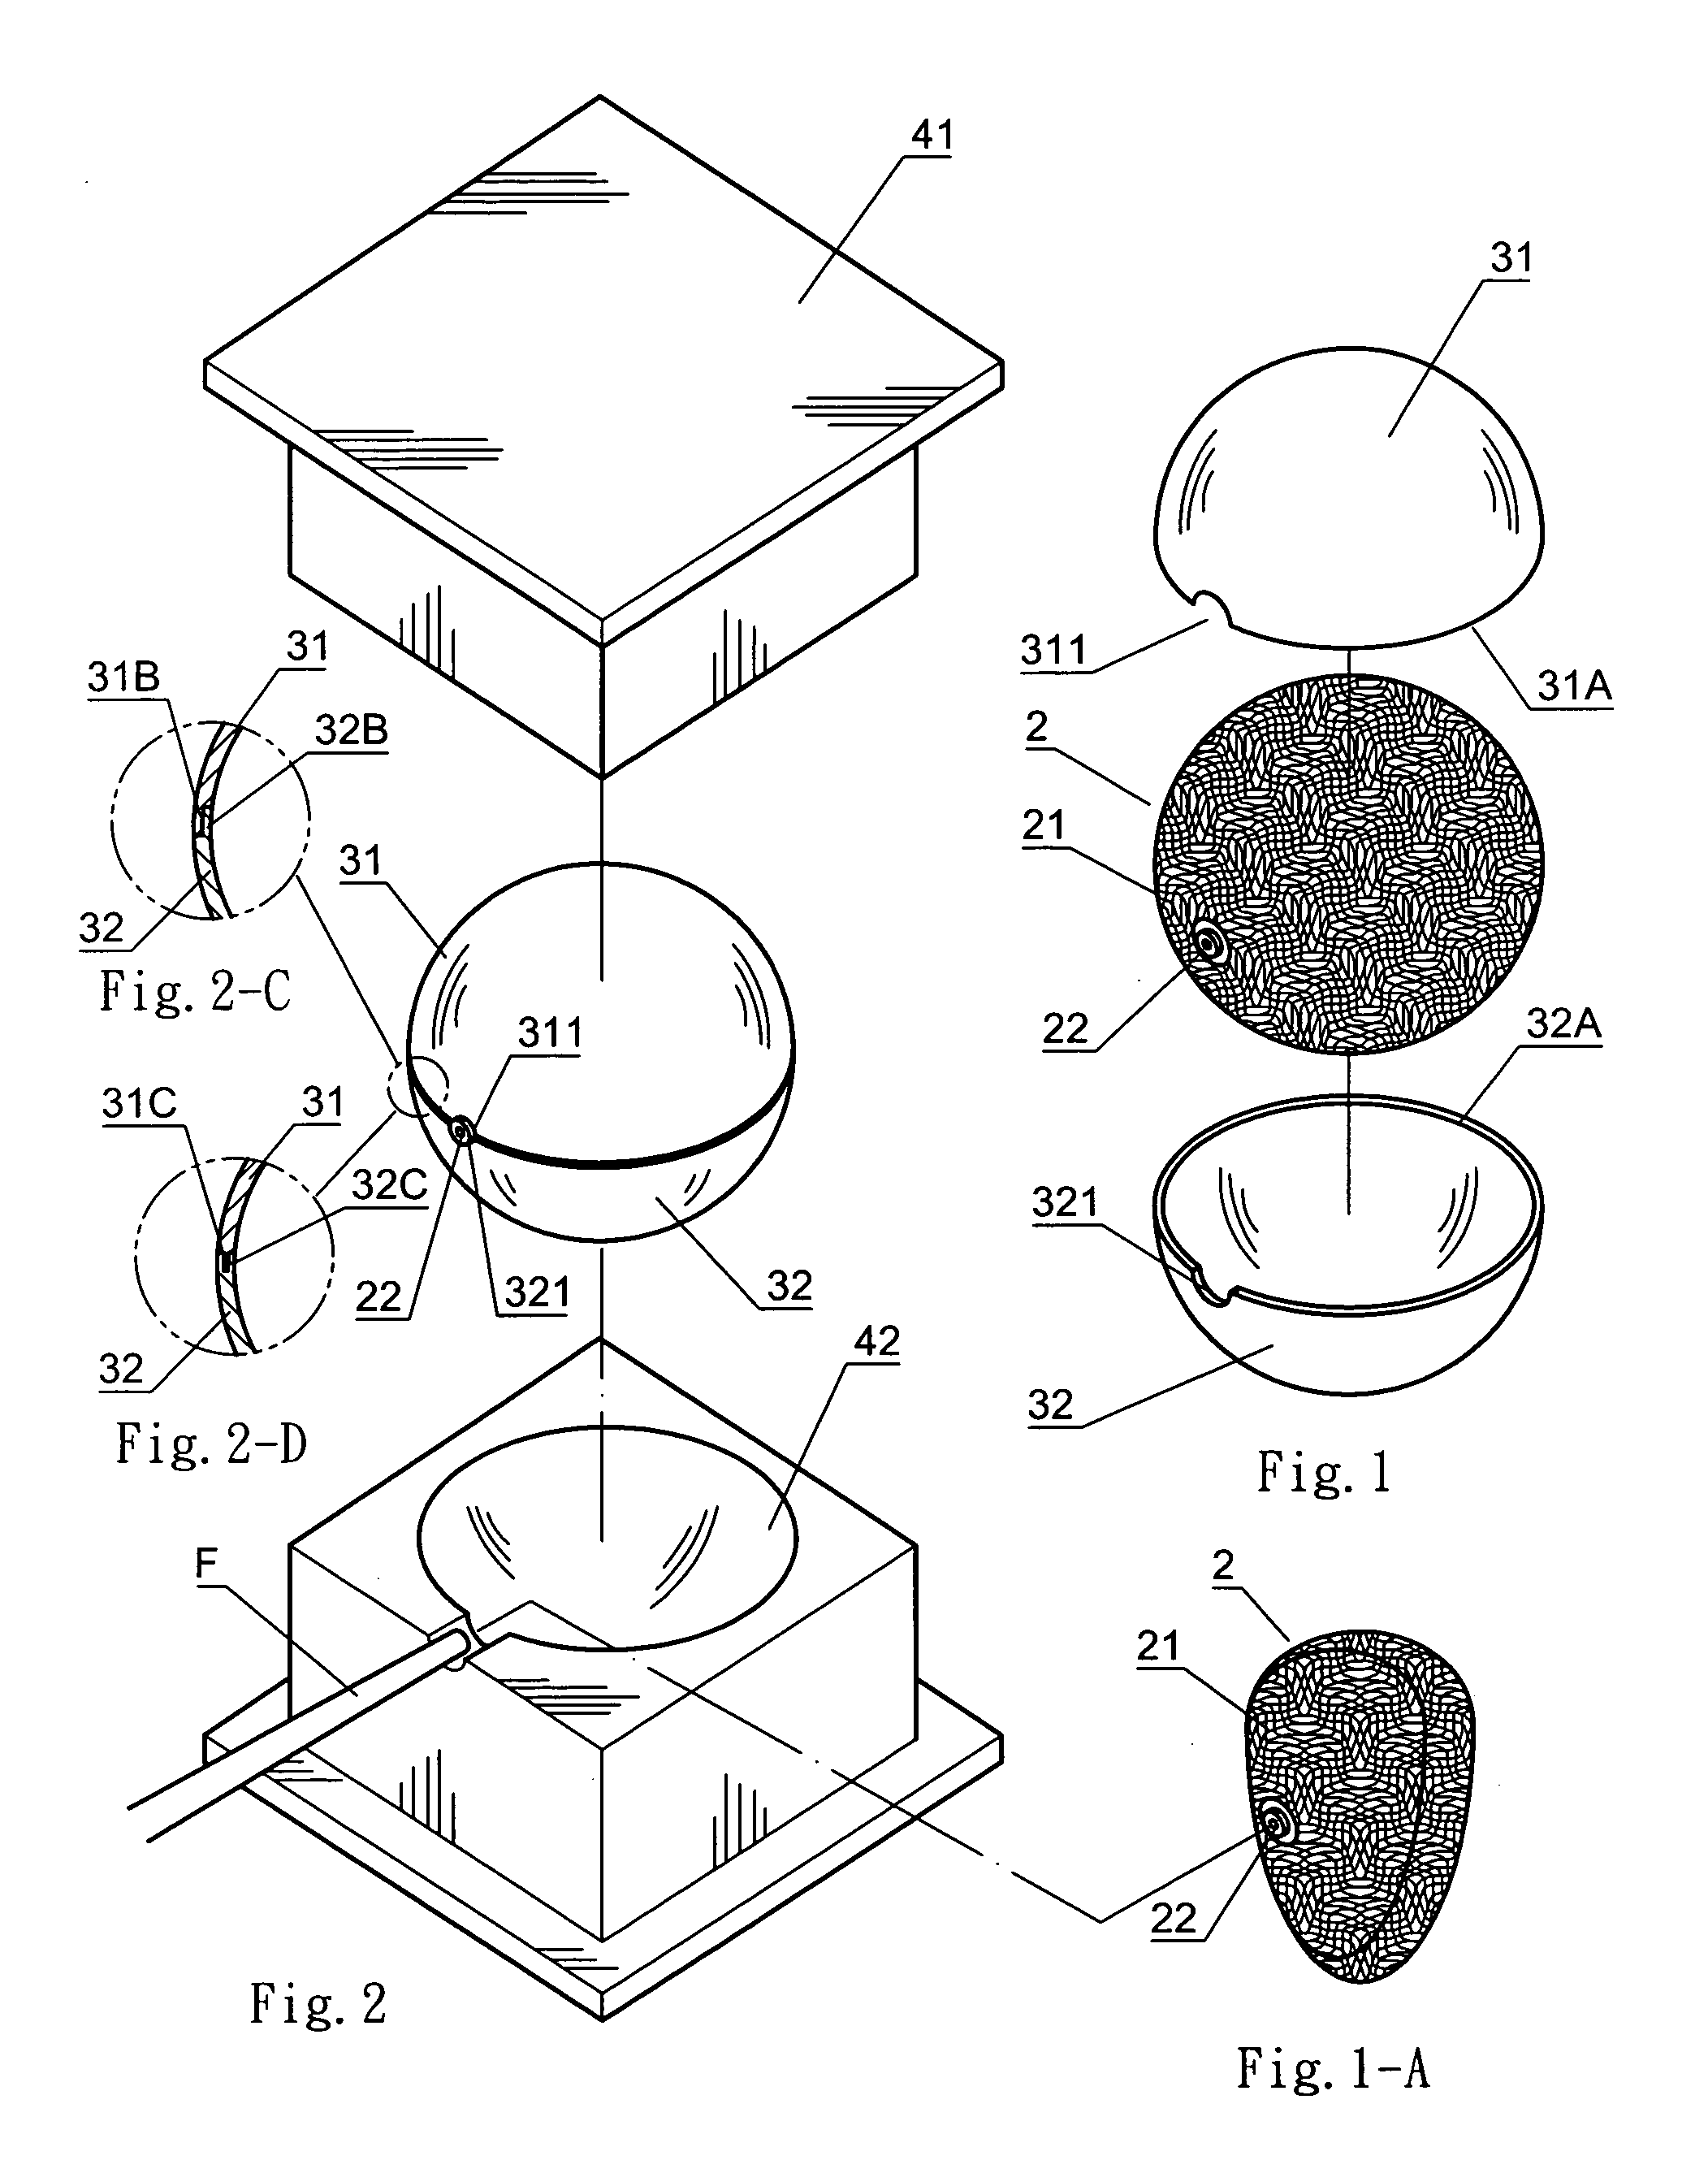 Manufacturing method for seamless manmade Leather ball